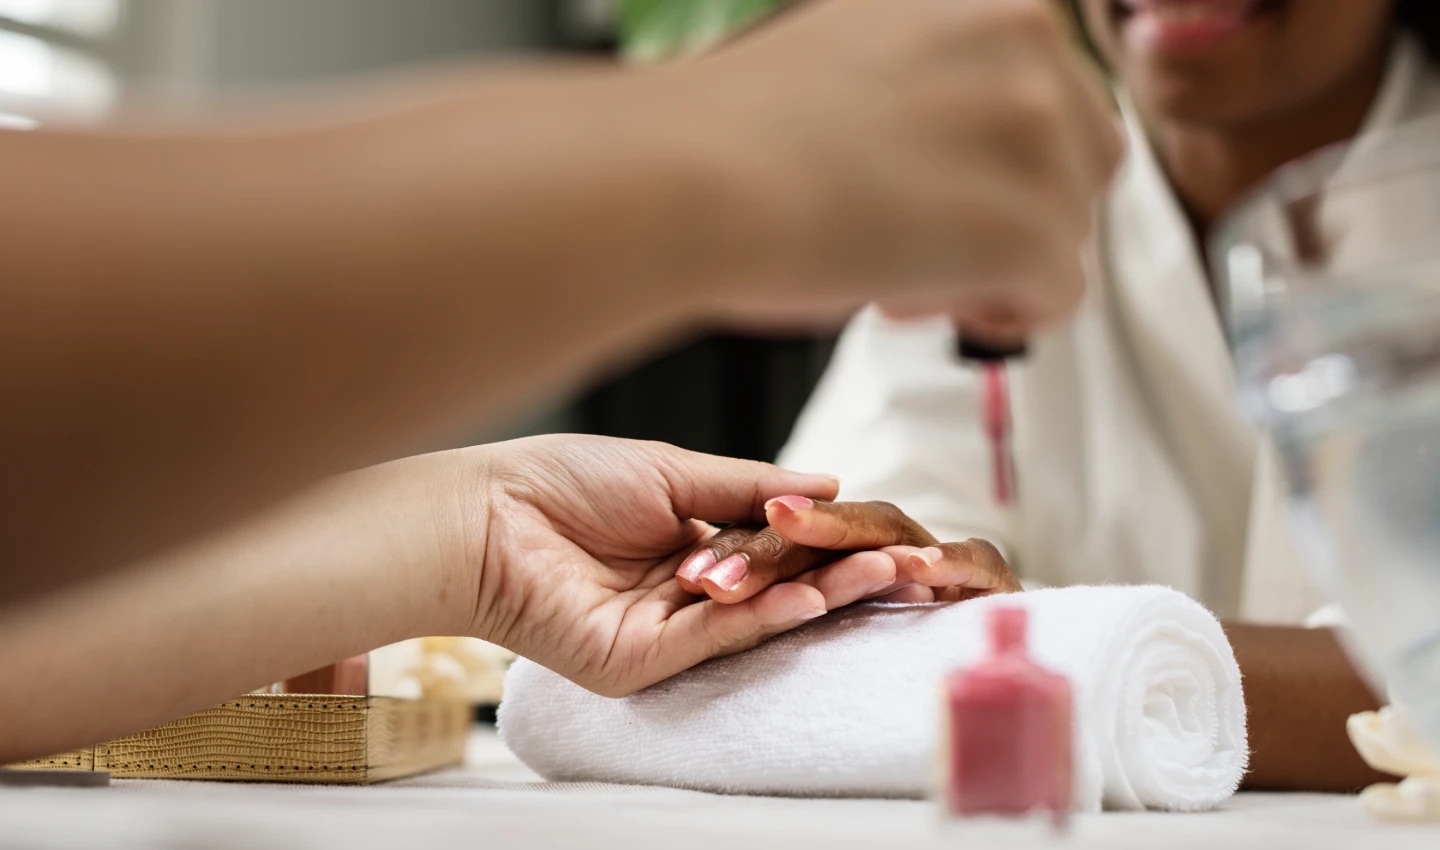 DIY Gel Nails - Image of a woman in a spa salon, enjoying a therapy treatment while getting her nails painted.